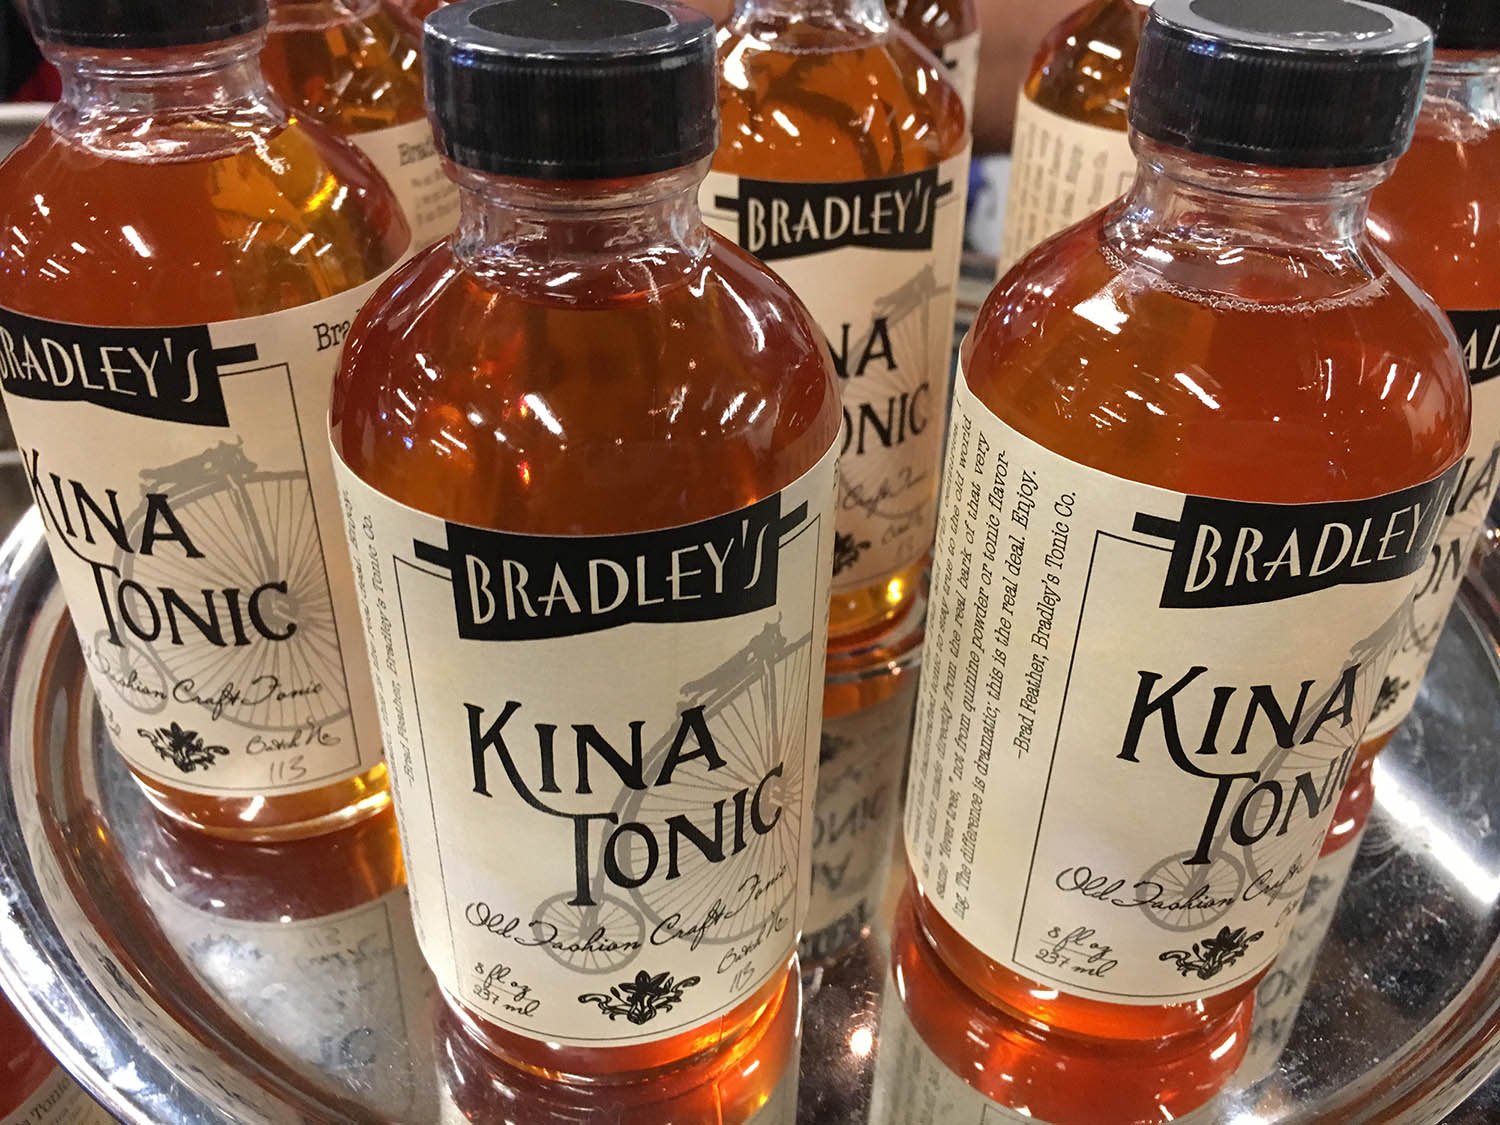 Bradley Tonic at TOAST 2017 | A Well Crafted Party